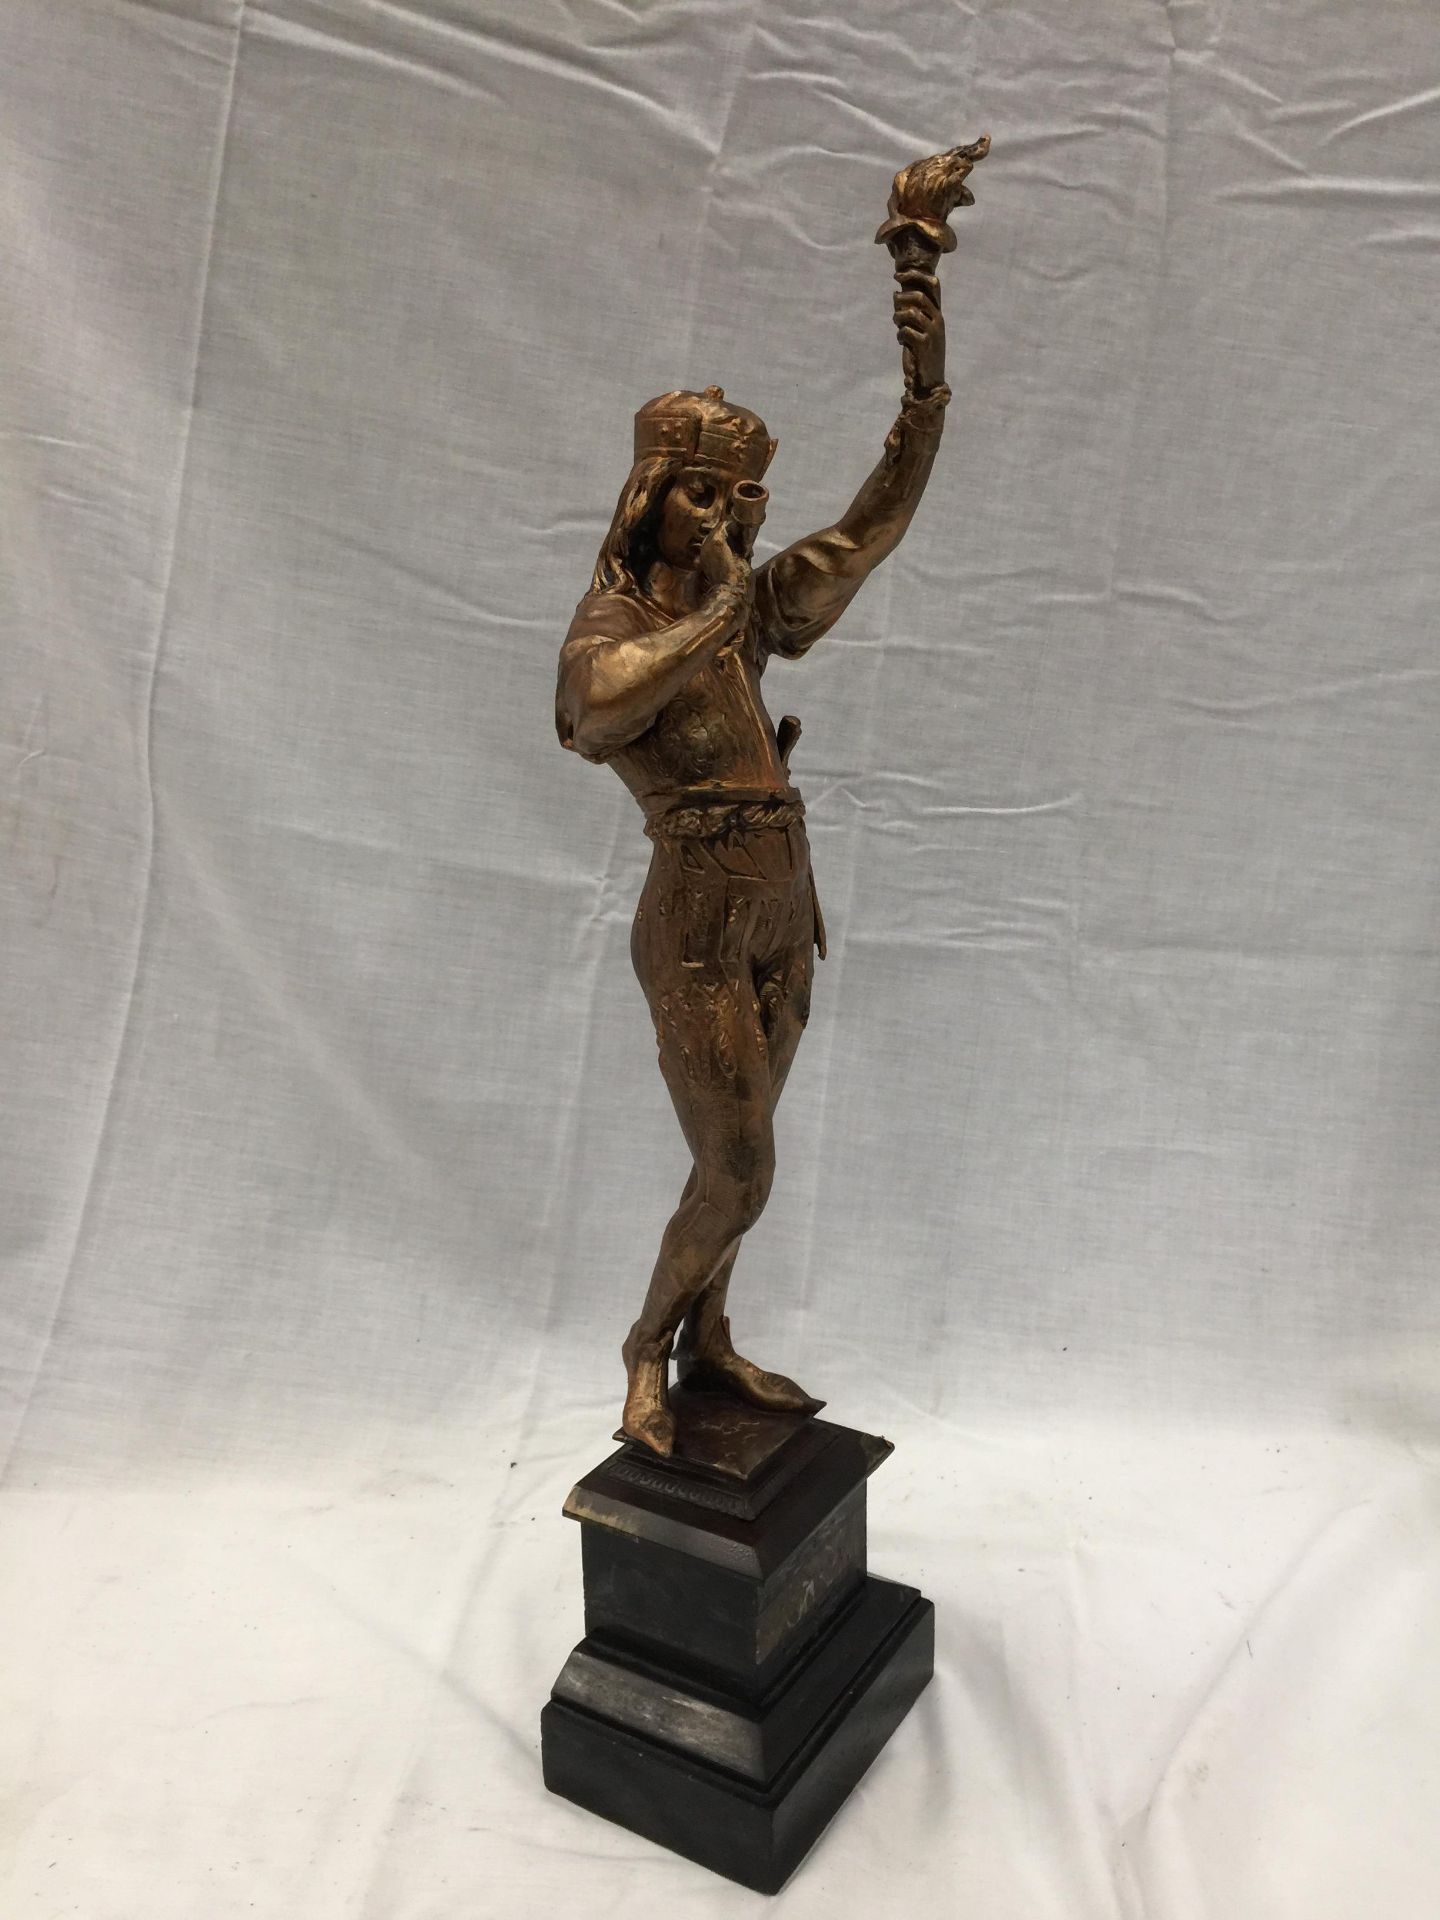 A METAL STATUETTE OF A CLASSICAL FIGURE ON A PLINT HEIGHT 60CM - Image 4 of 12